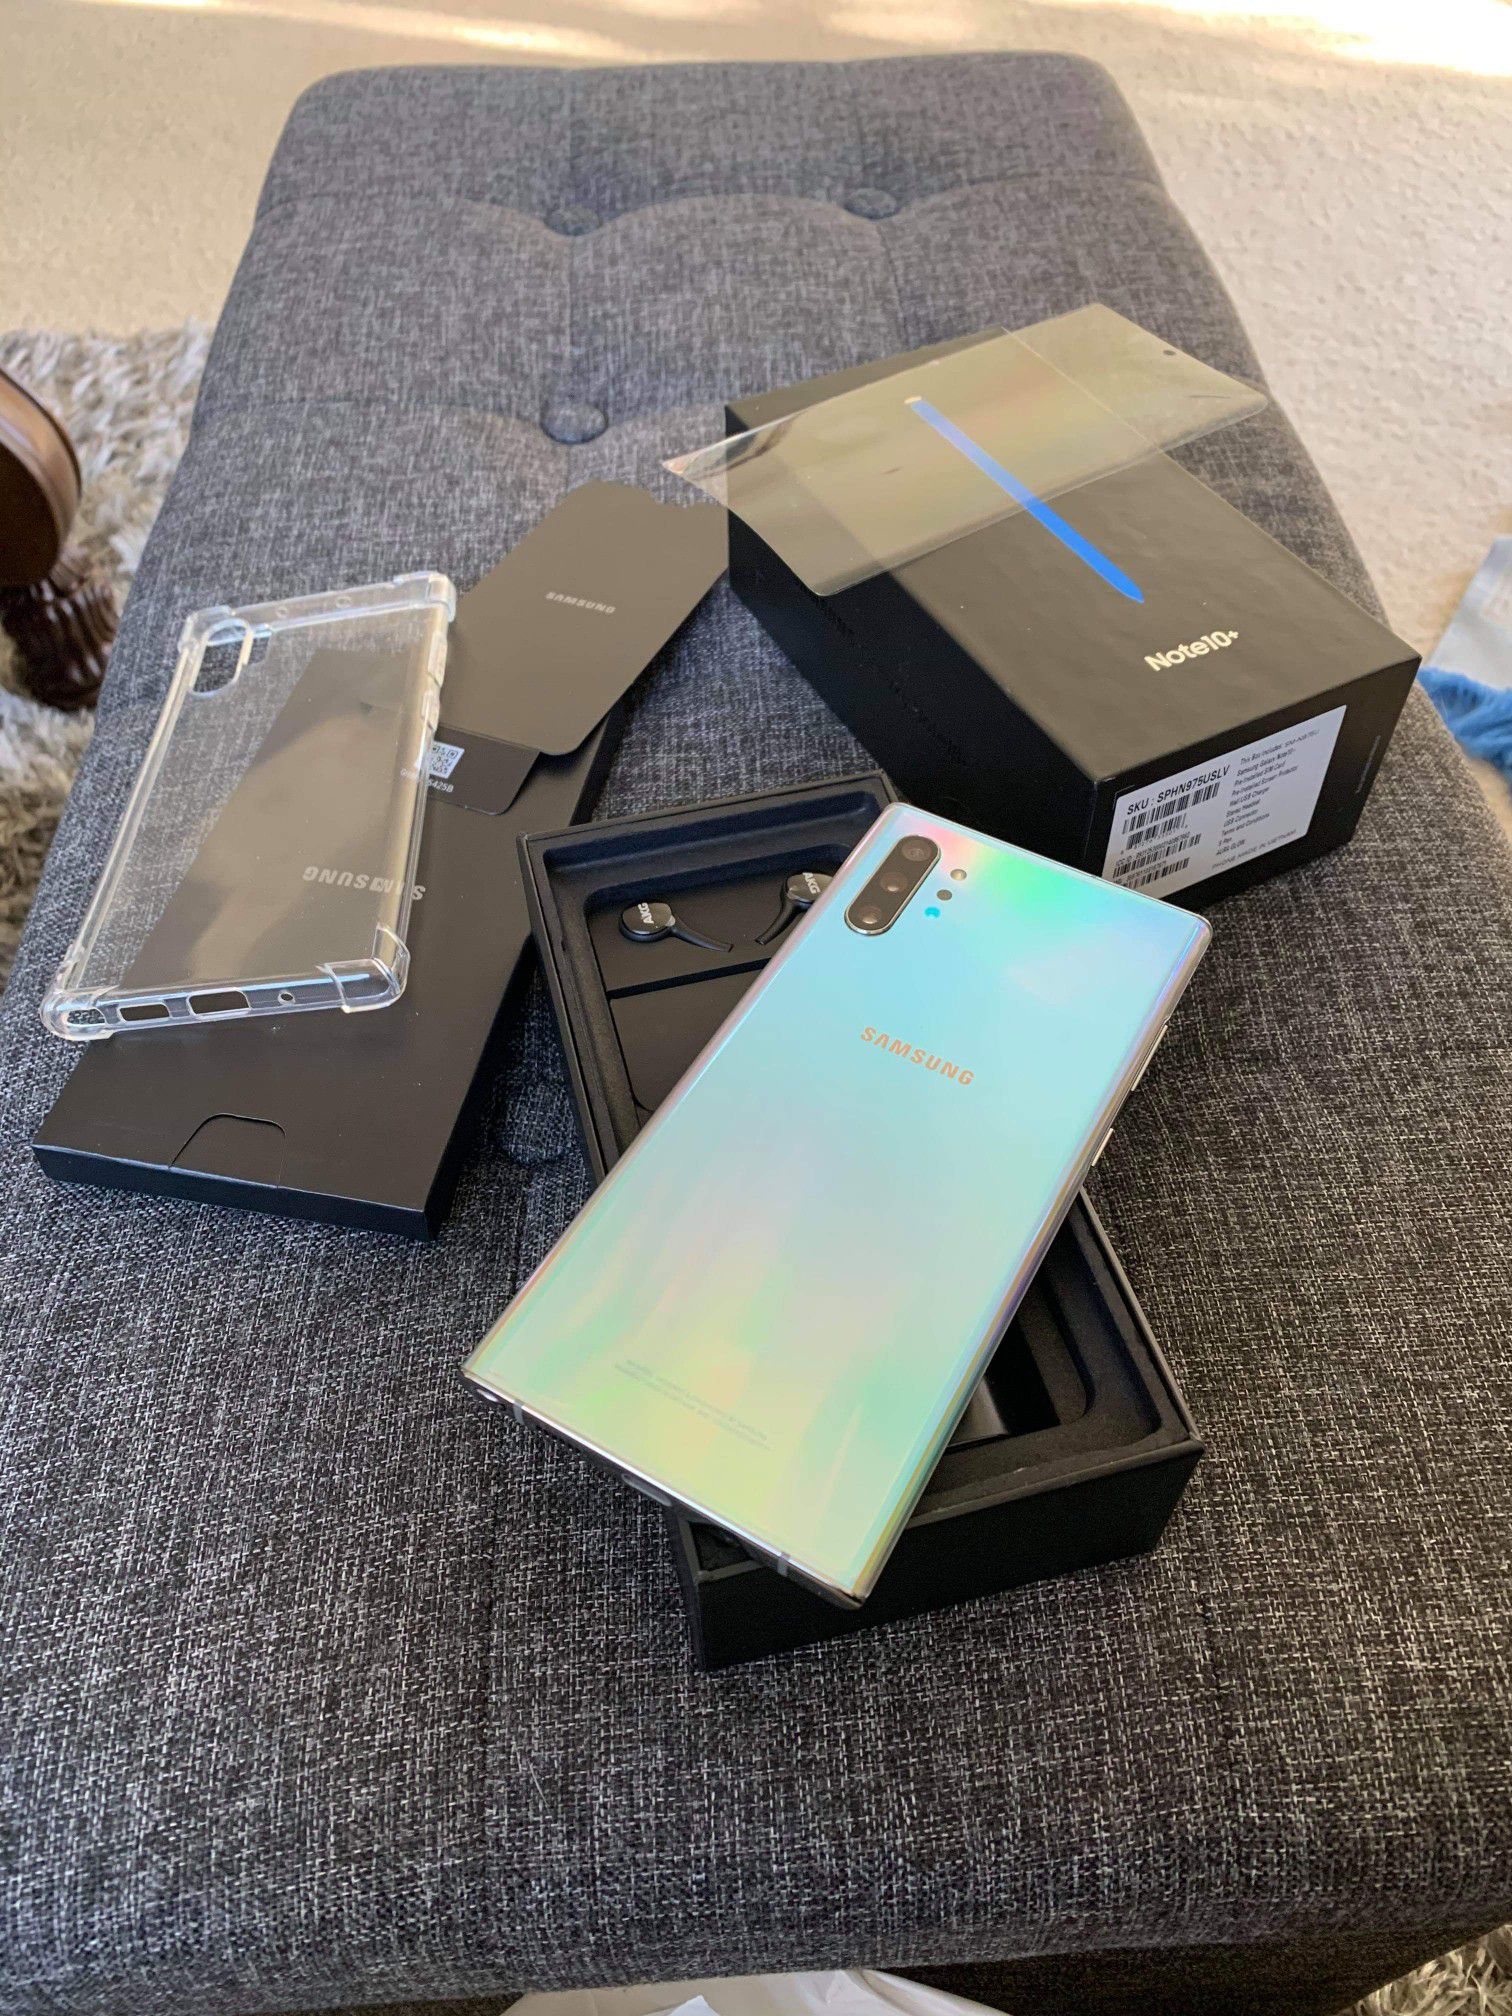 Samsung Galaxy Note 10 plus 256gb for sprint like brand new open box case screen protector no chipping no delivery no trade